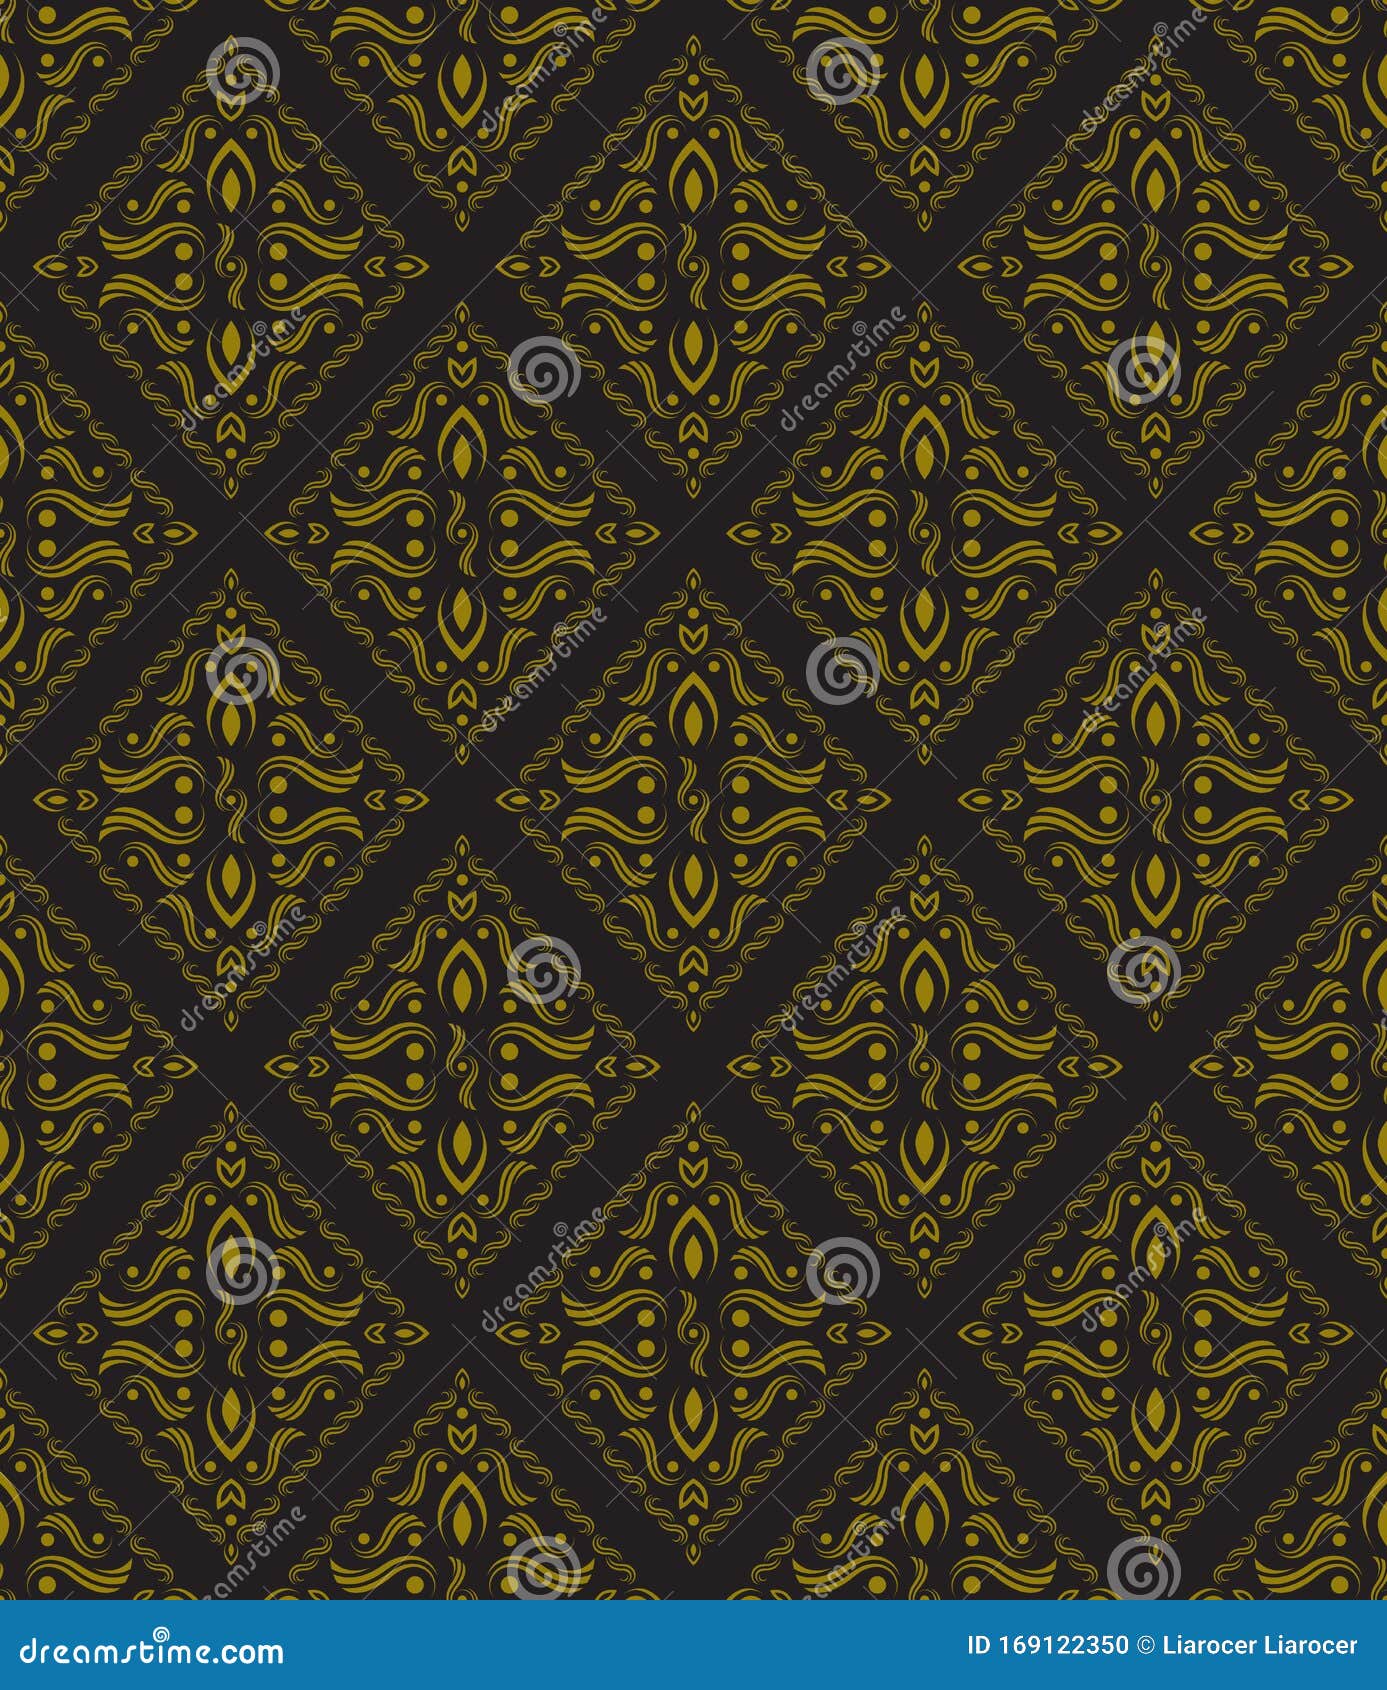 Abstract Ornament Seamless Pattern Wallpaper Stock Vector ...